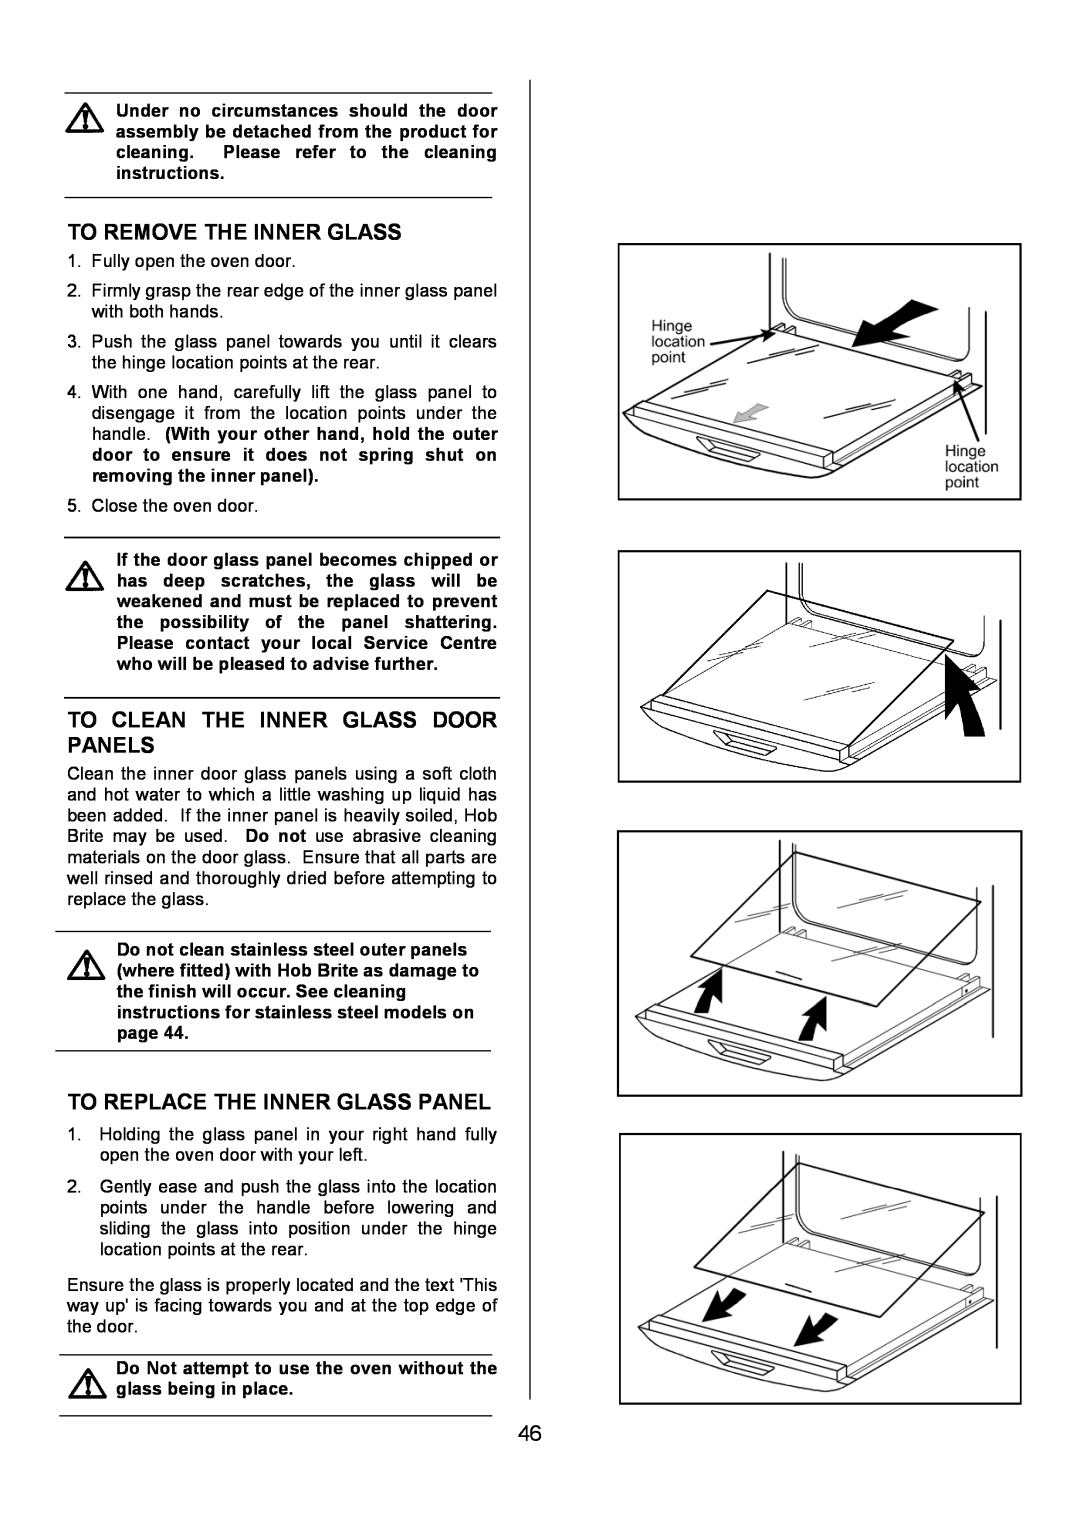 Electrolux EOD6390 manual To Remove The Inner Glass, To Clean The Inner Glass Door Panels, To Replace The Inner Glass Panel 